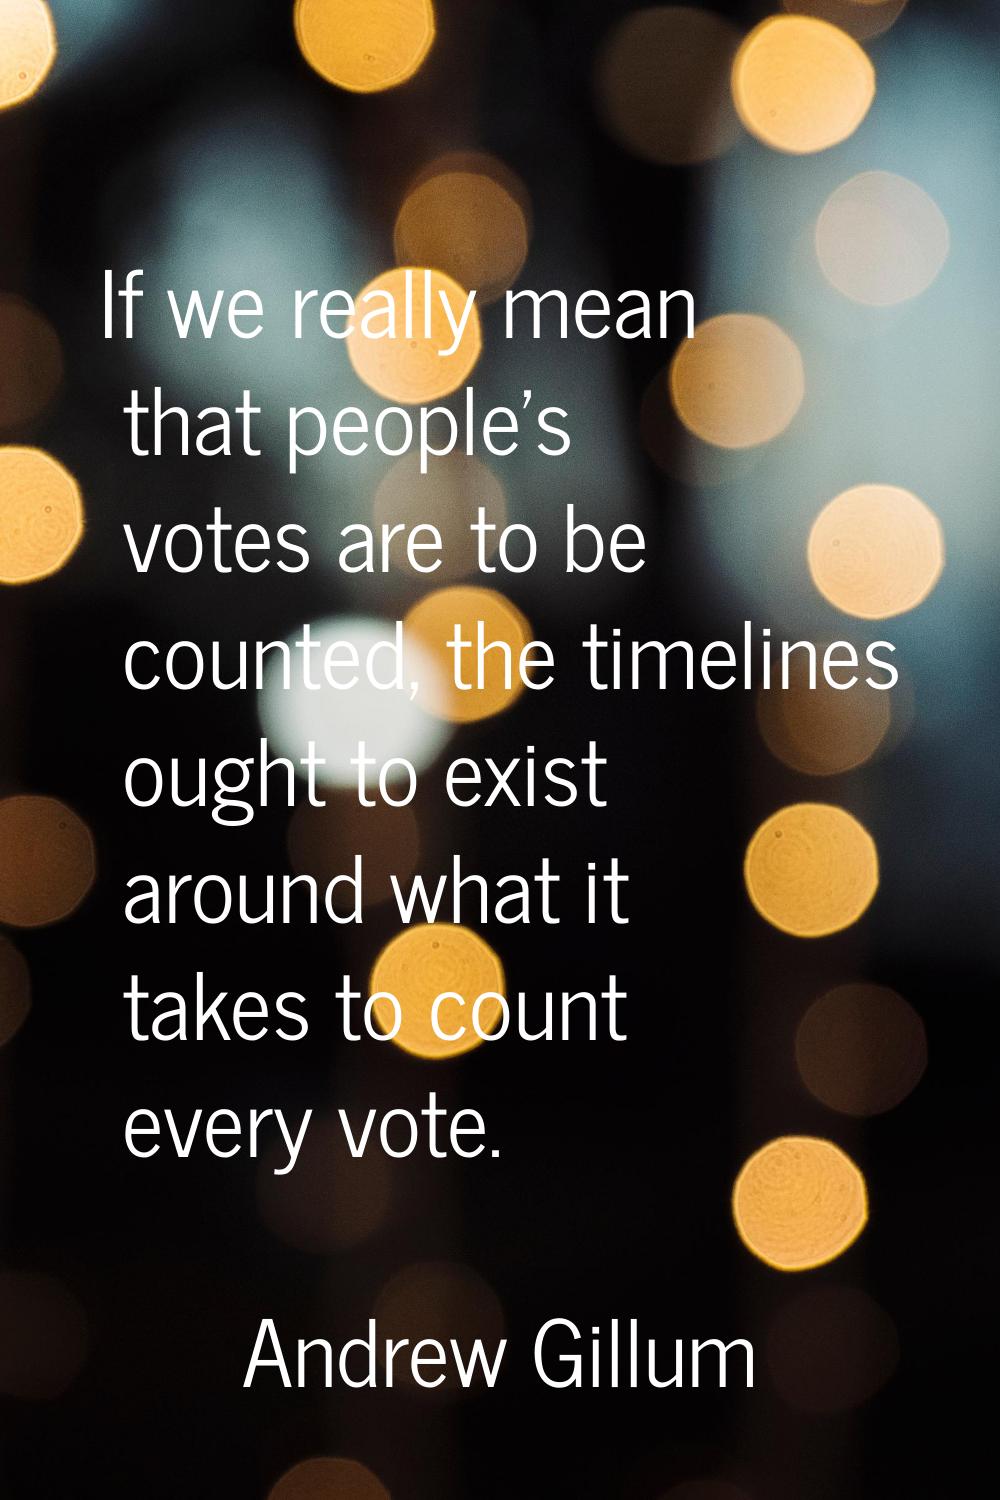 If we really mean that people's votes are to be counted, the timelines ought to exist around what i